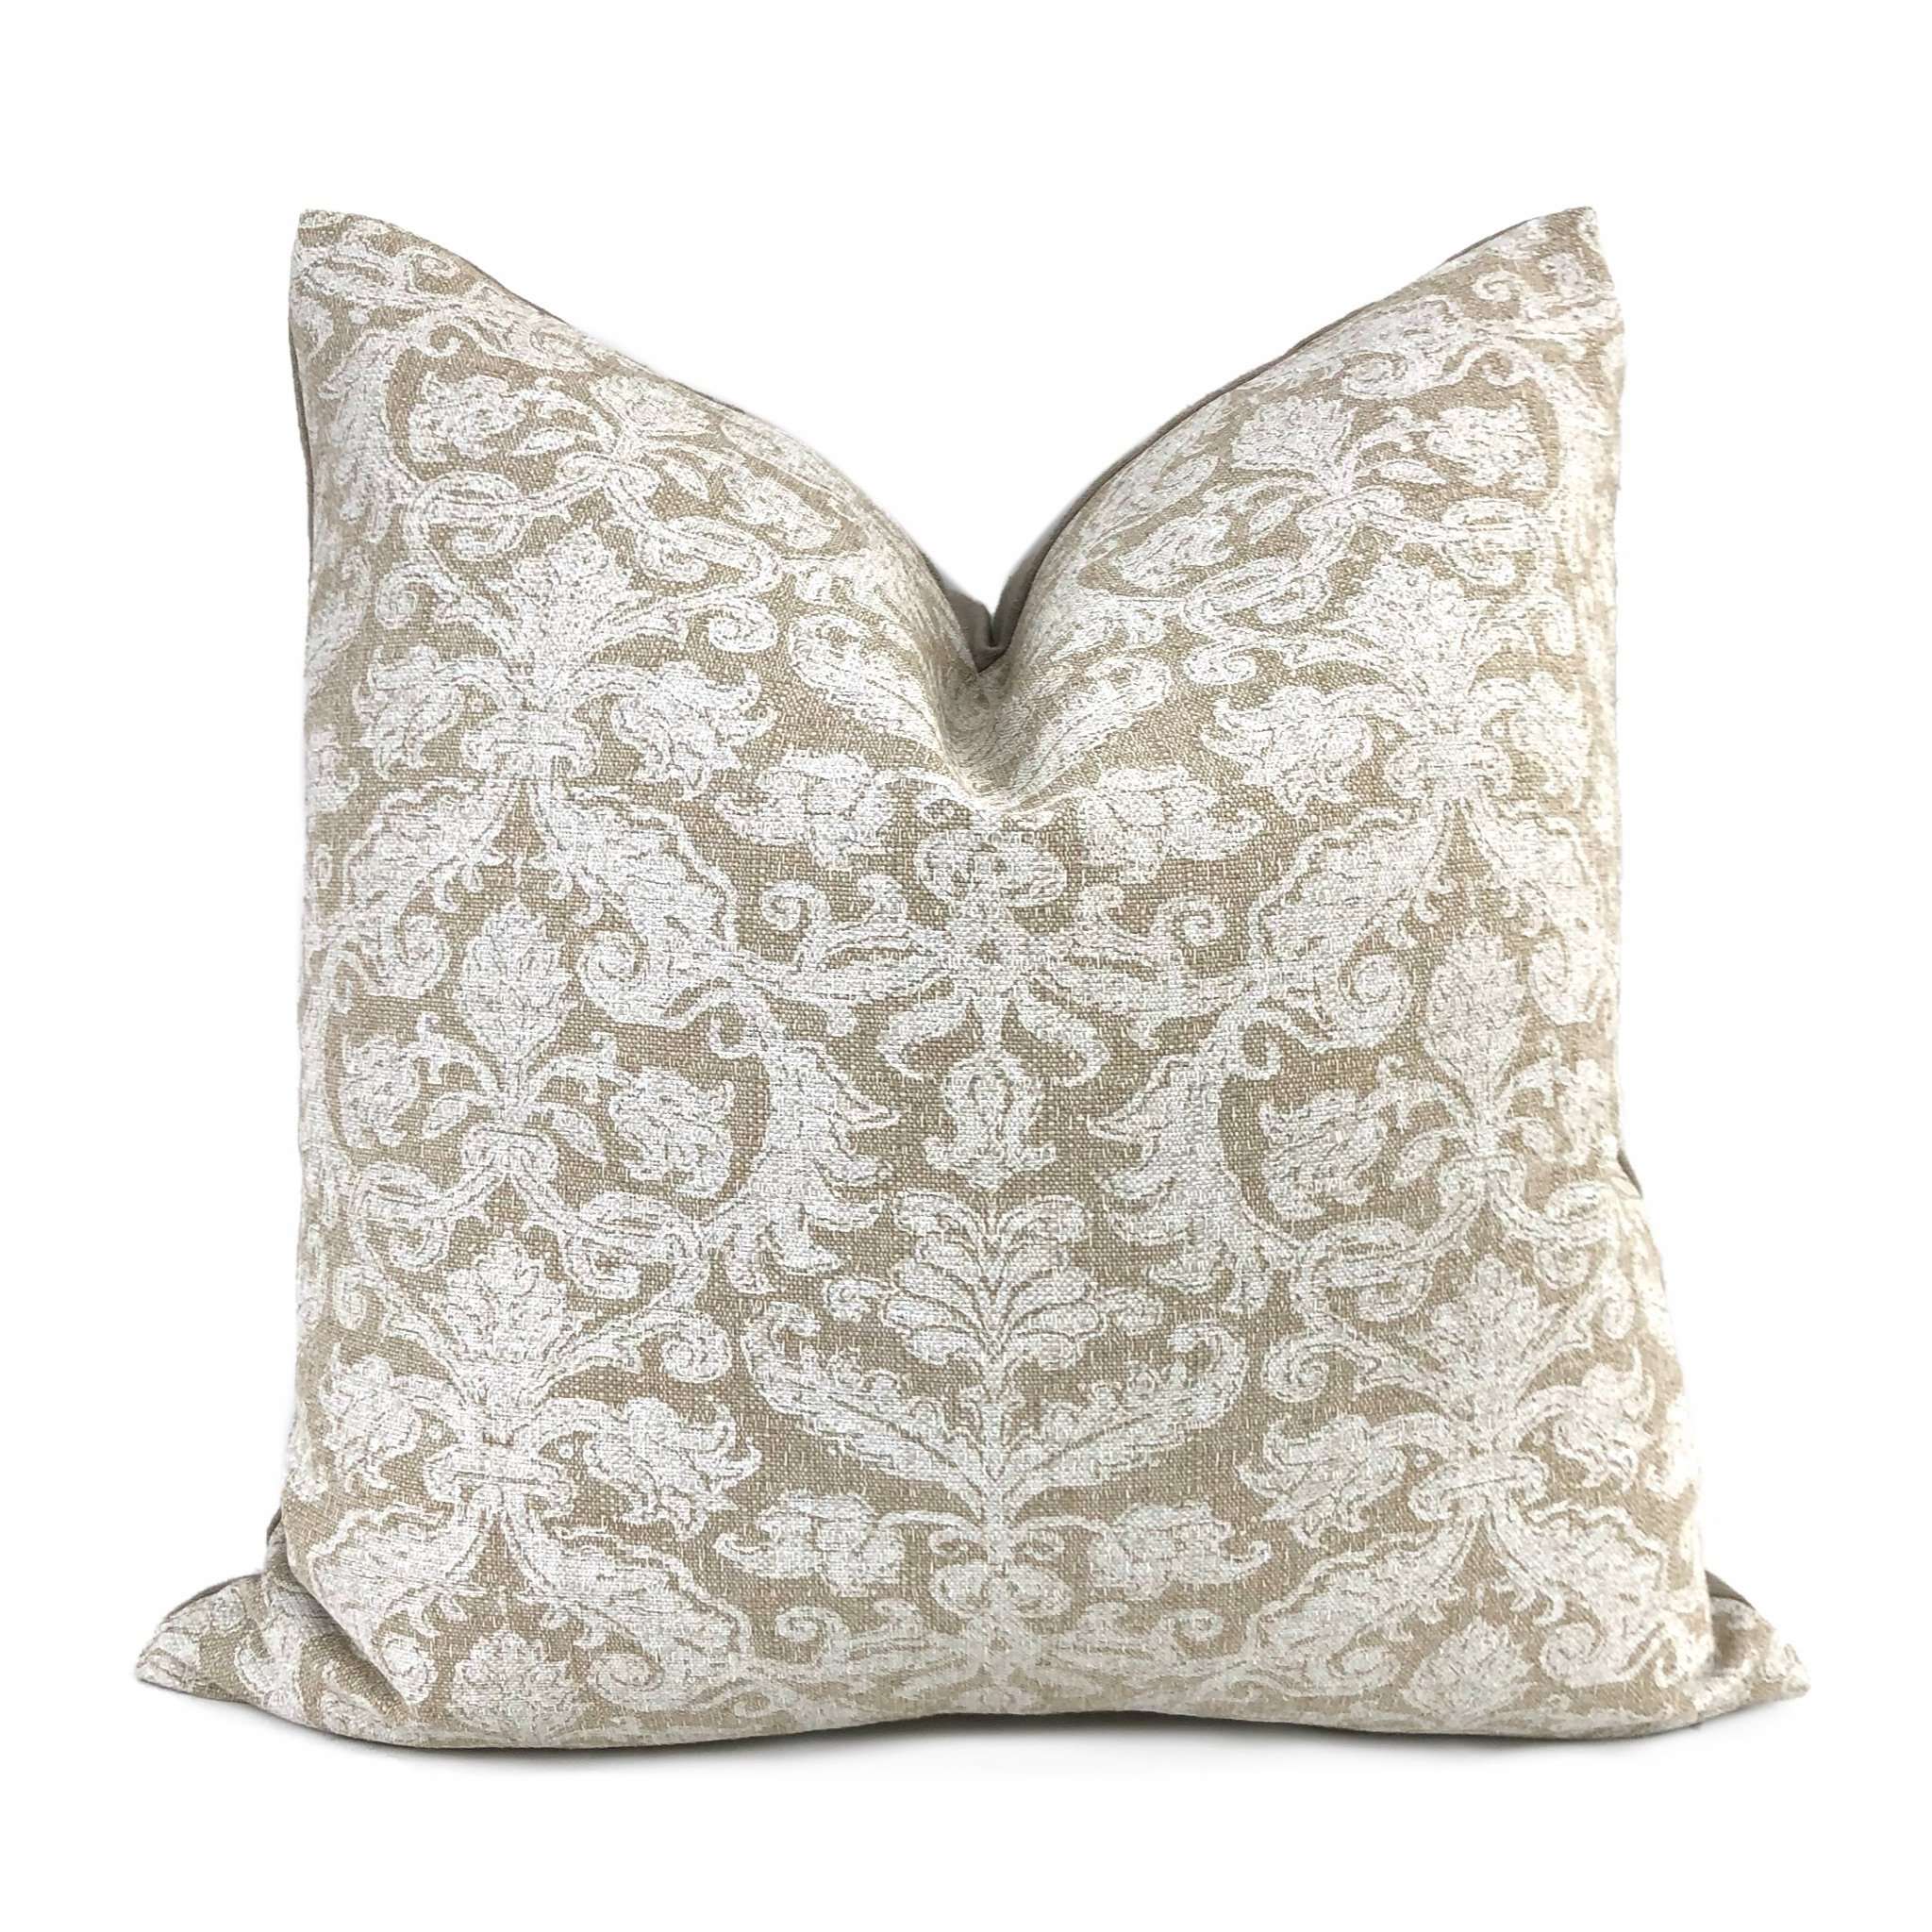 https://cdn.shopify.com/s/files/1/0936/5222/products/savannah-chalk-white-beige-damask-floral-pillow-cover-lacefield-designs-fabric-by-aloriam-13660701.jpg?v=1571439487